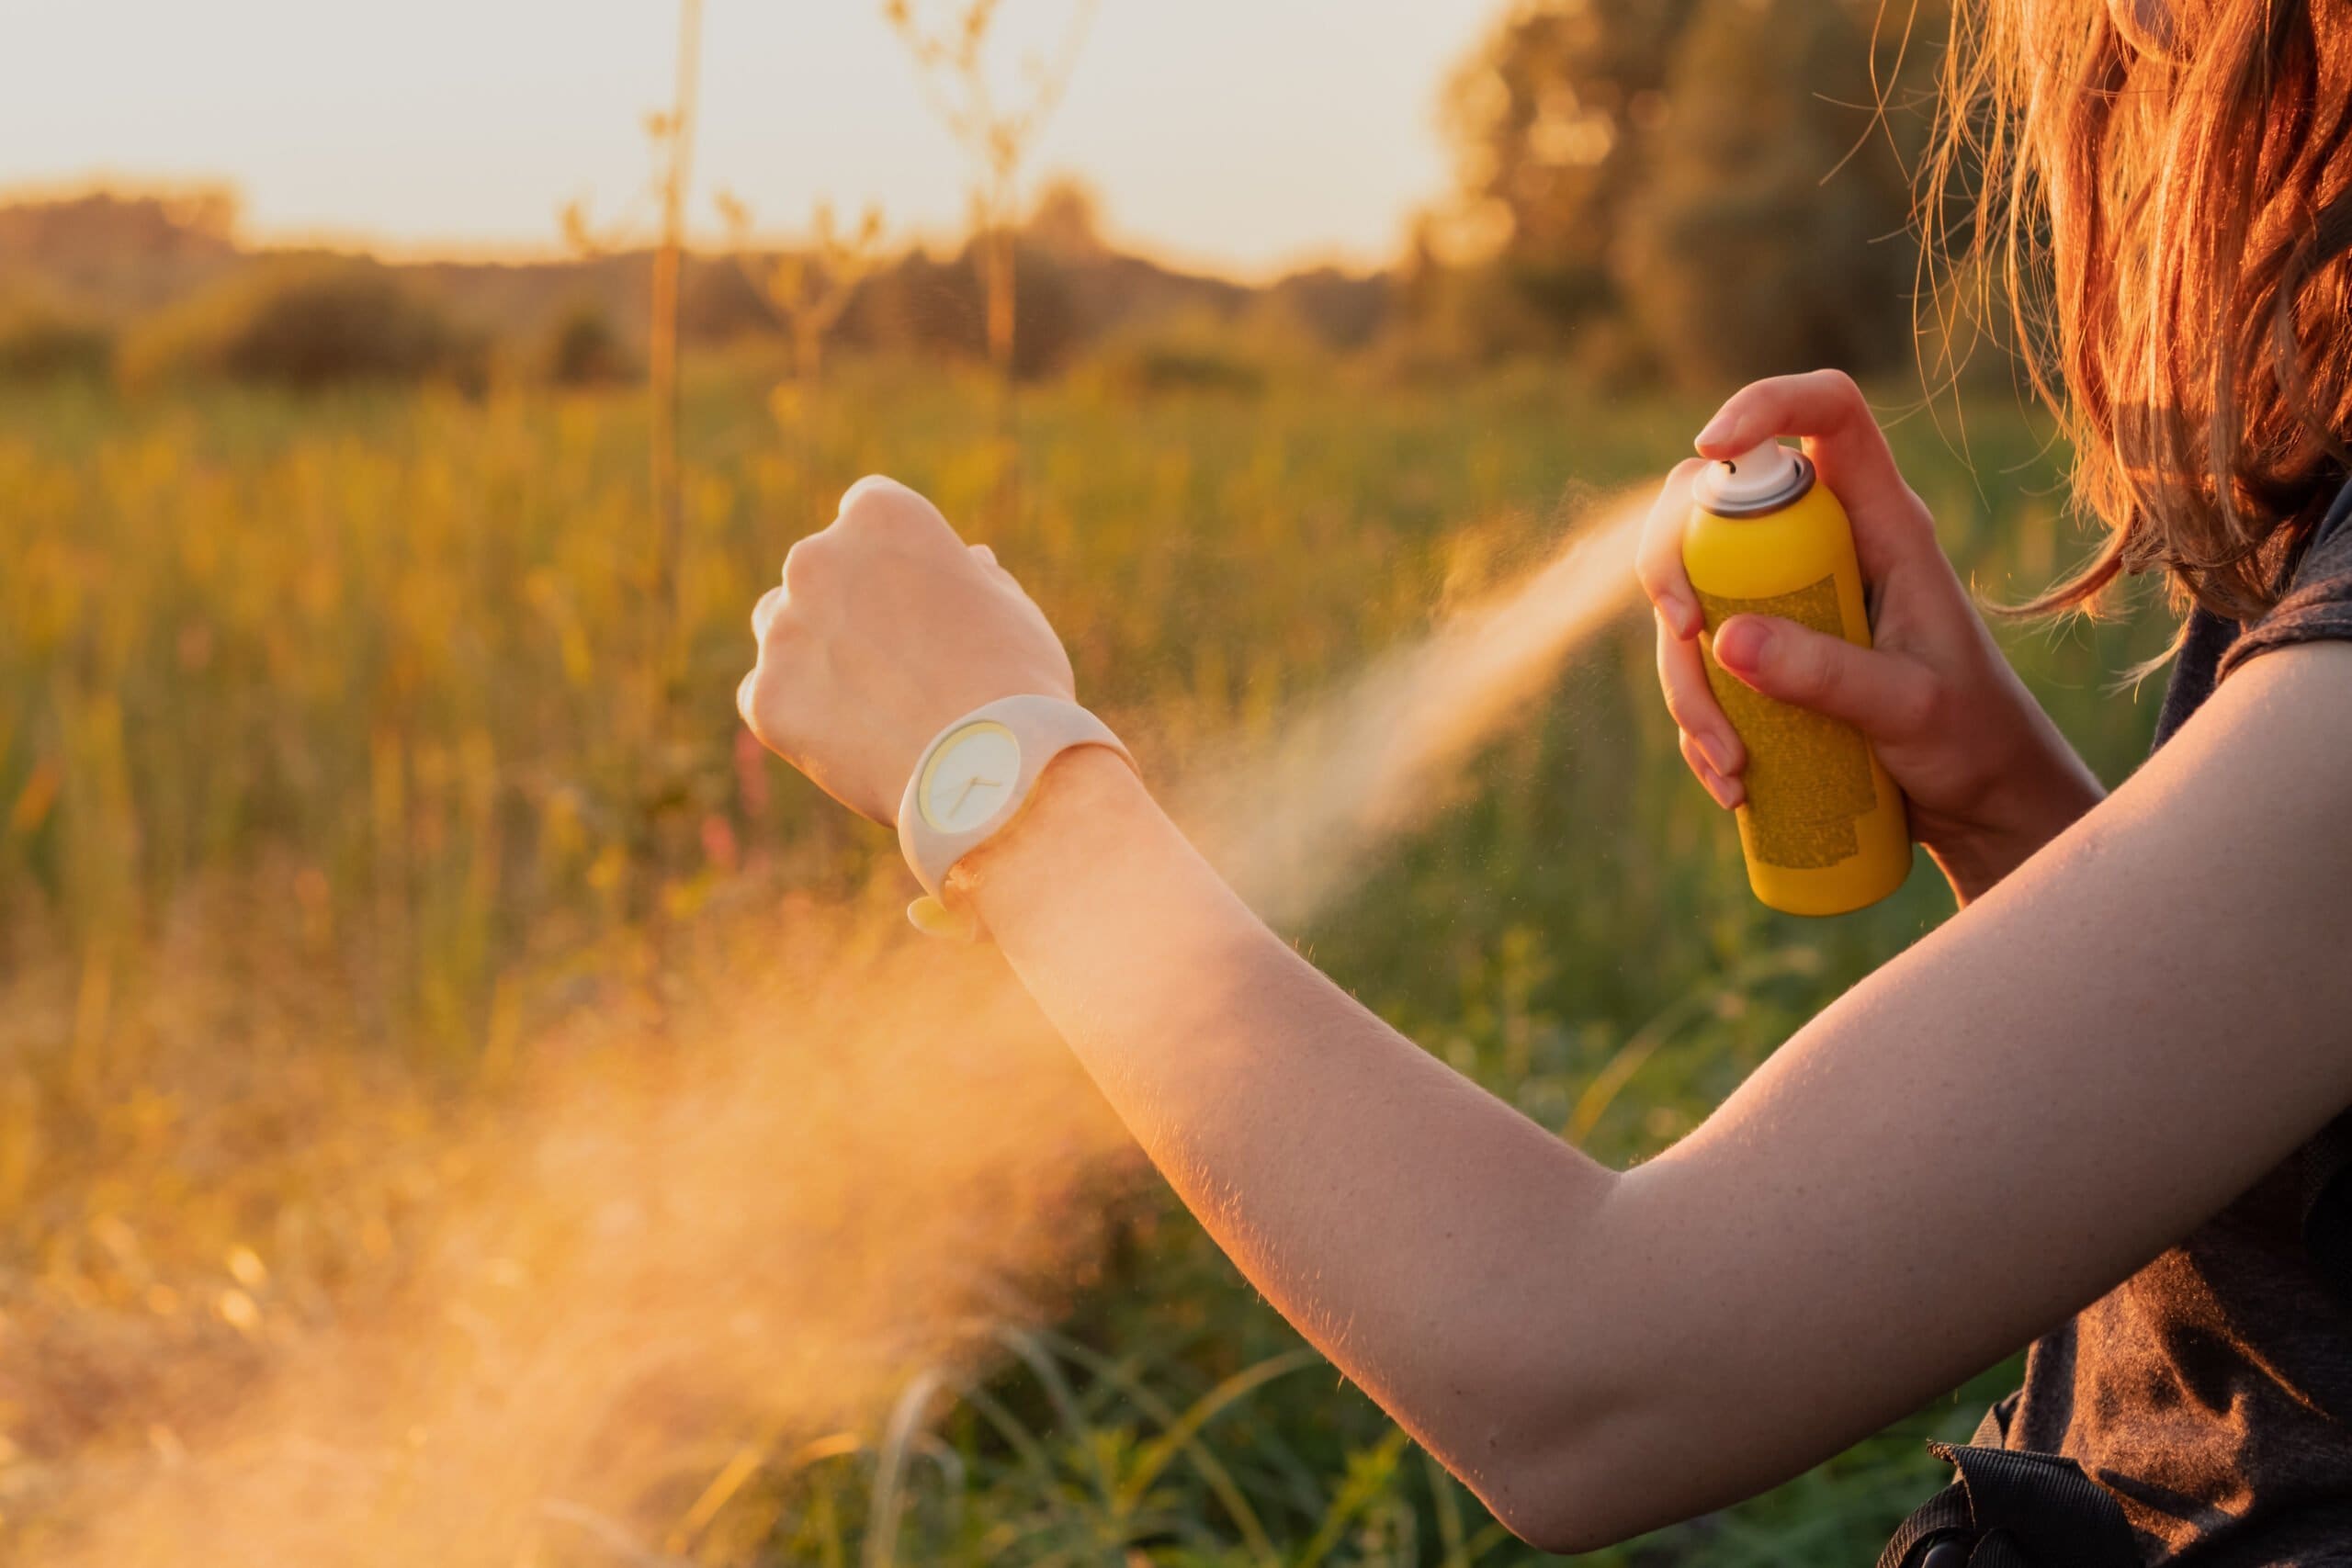 Woman using mosquito spray repellant in a field